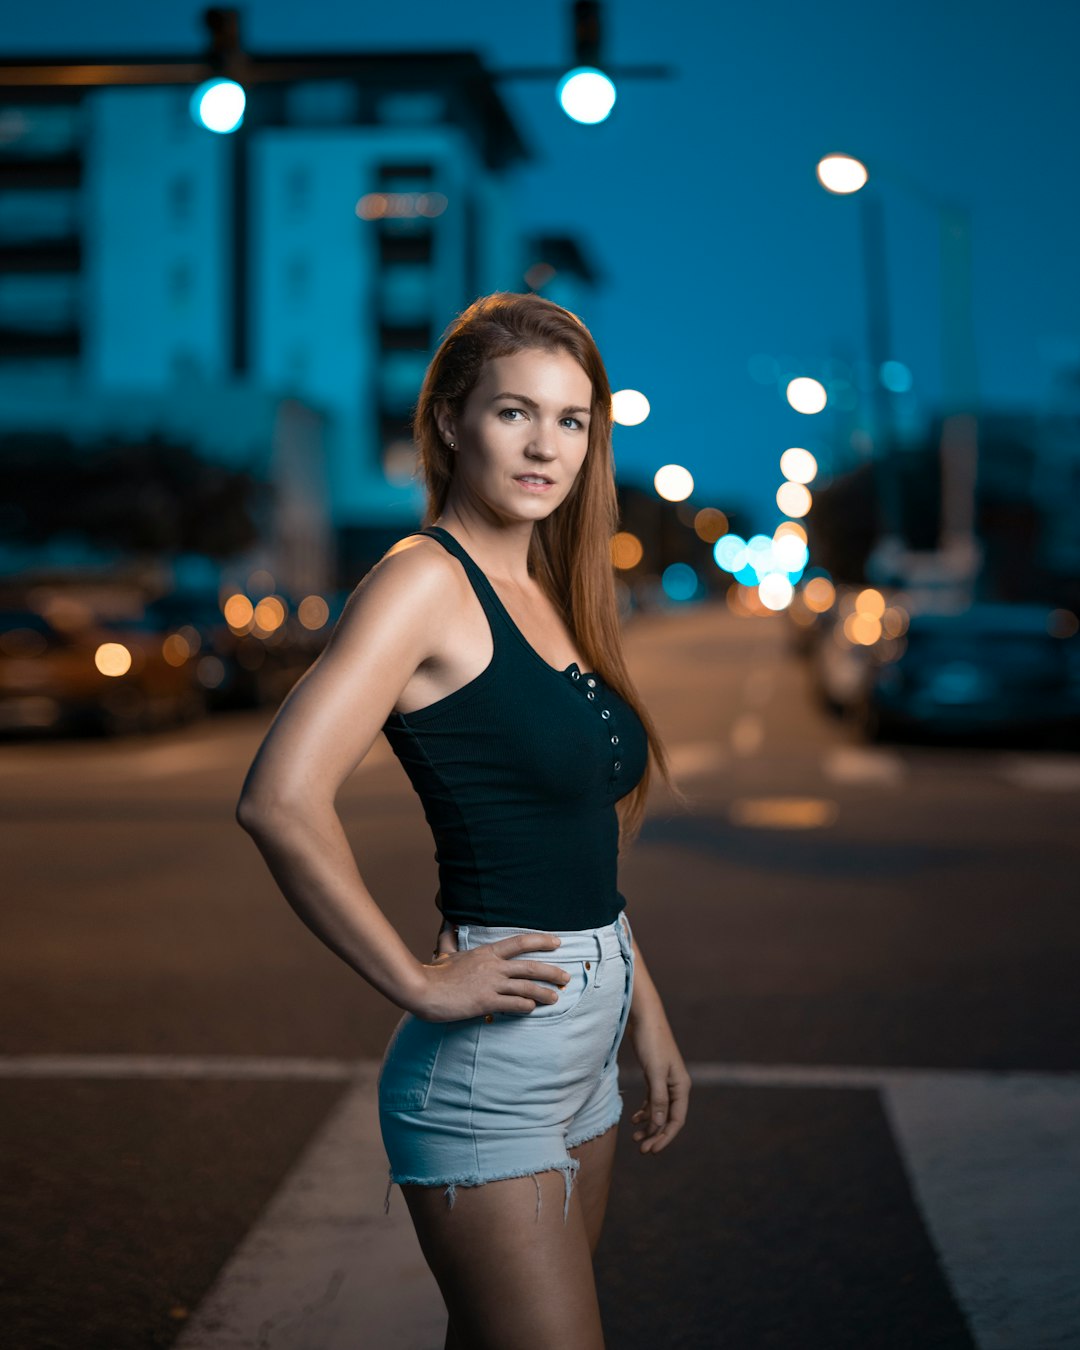 woman in black tank top and blue denim daisy dukes standing on road during night time